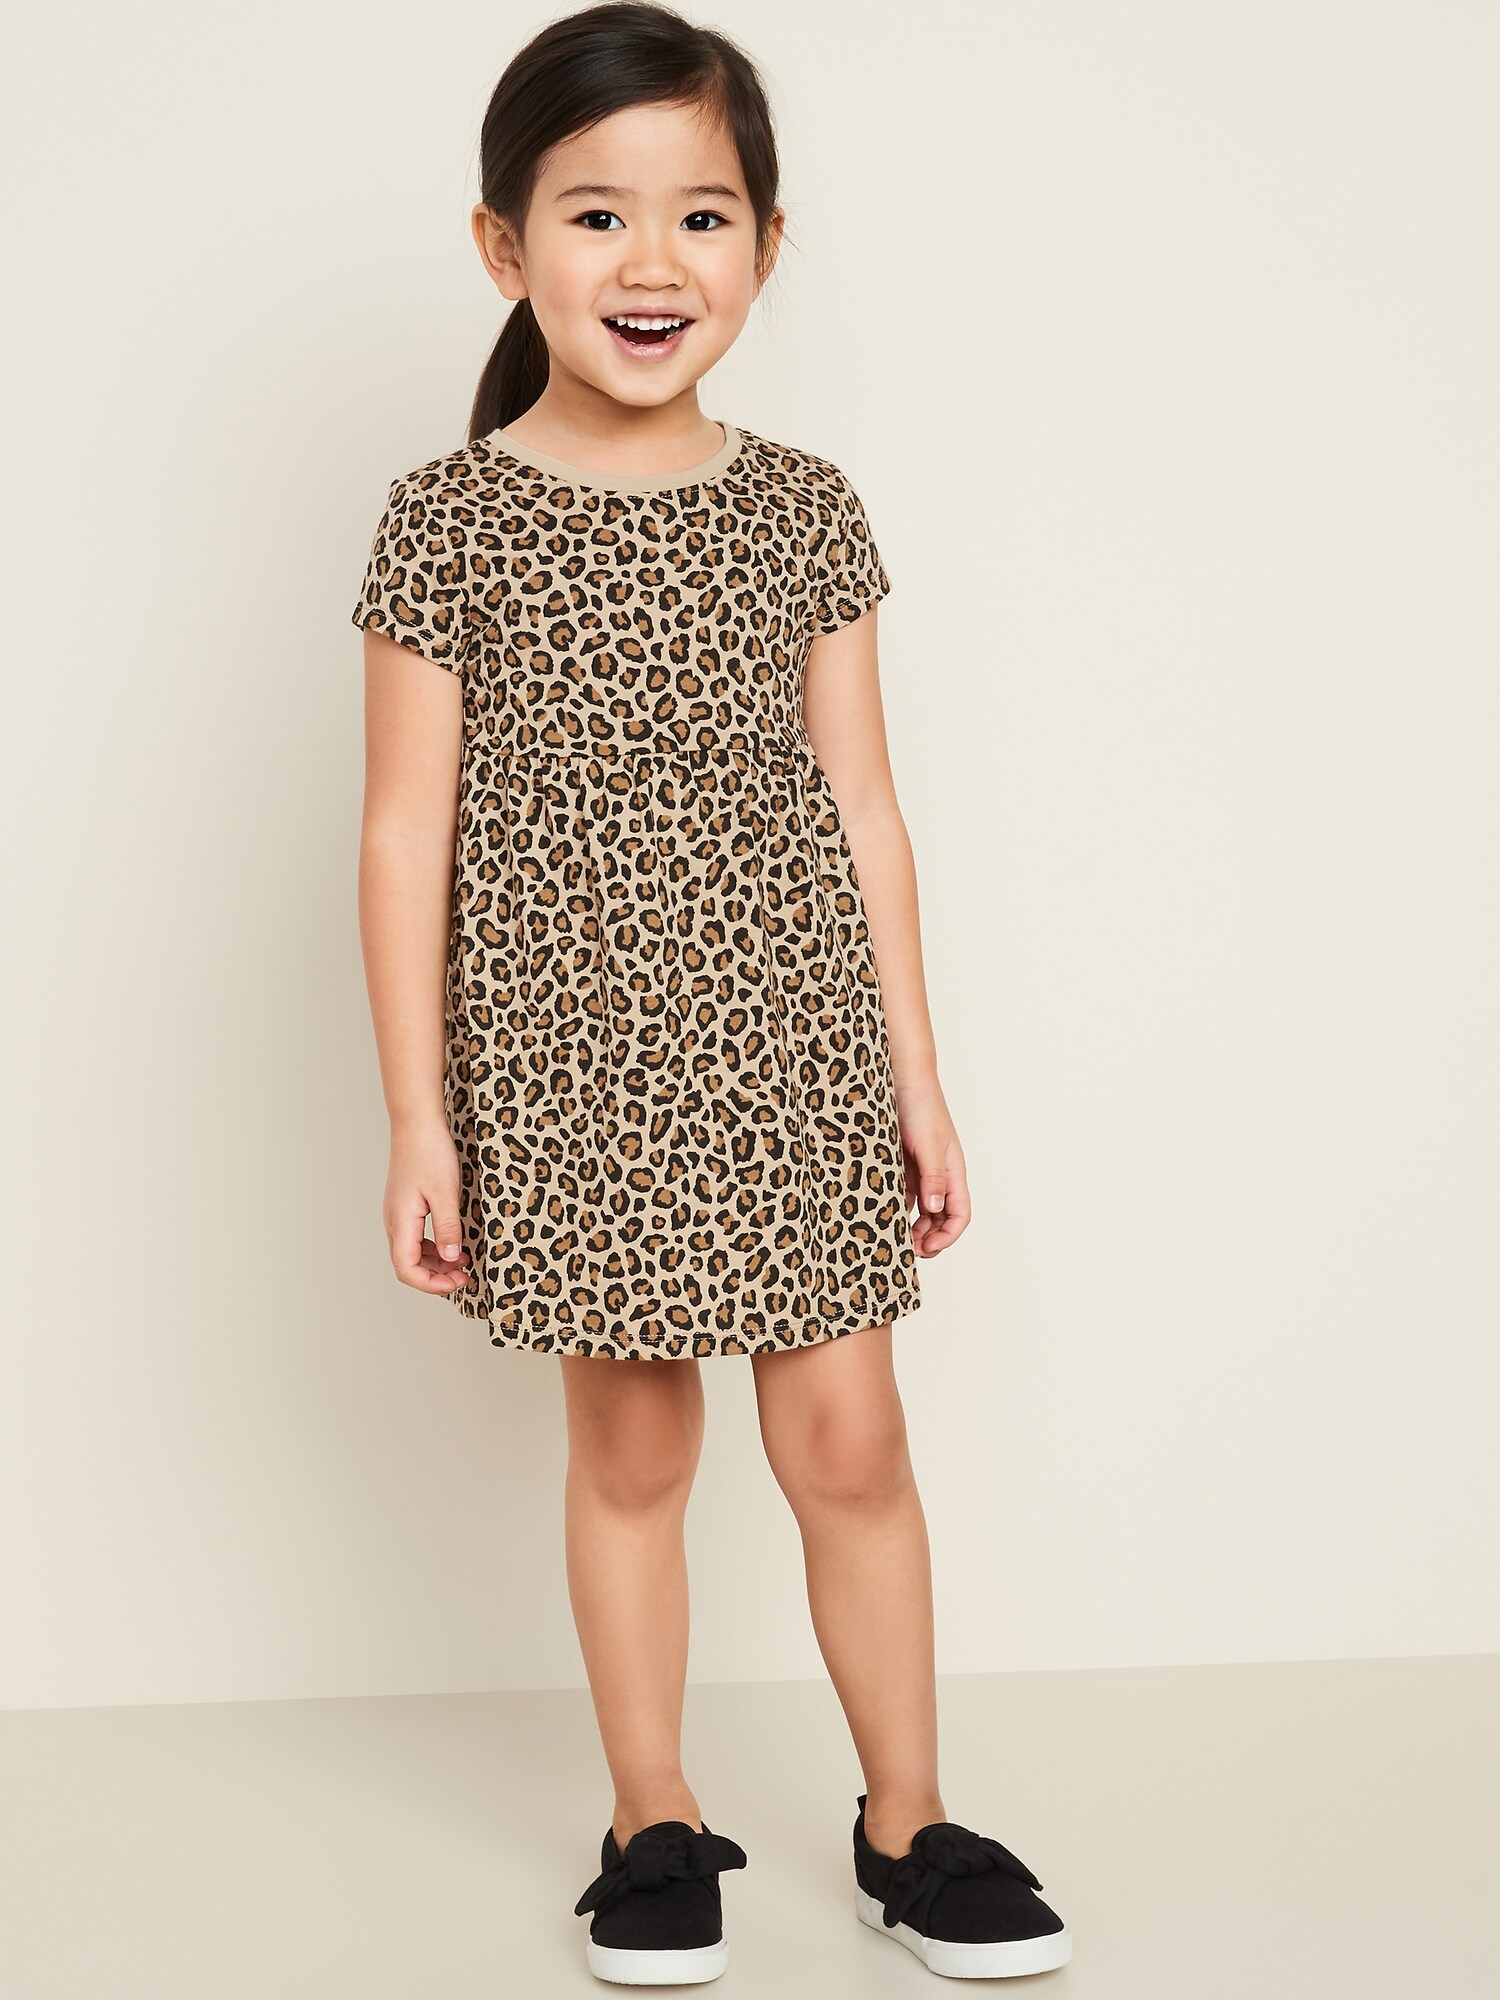 Printed Fit & Flare Dress for Toddler Girls